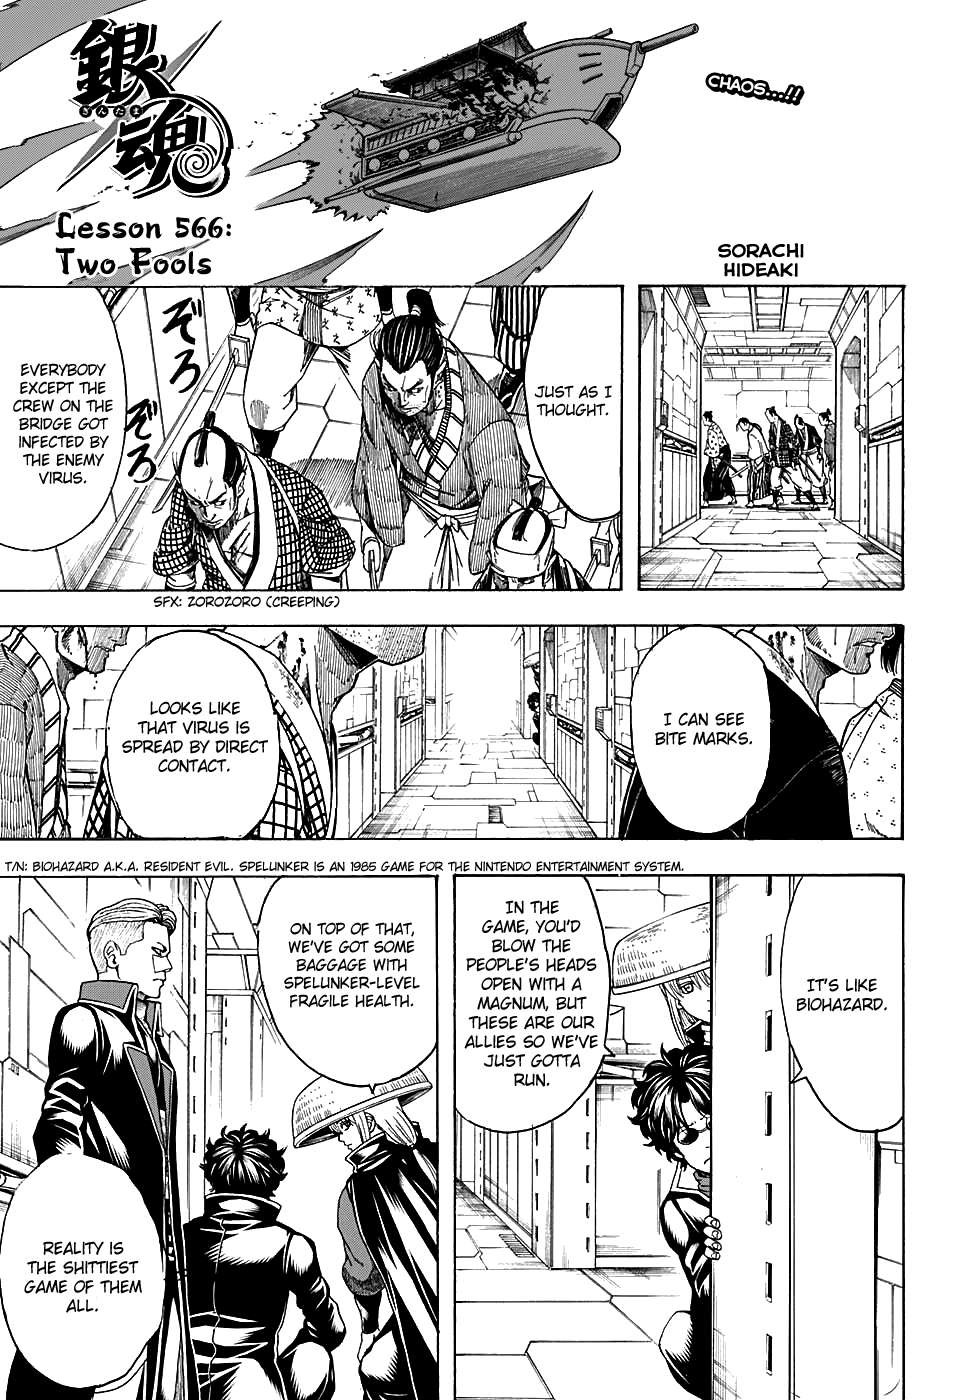 Gintama chapter 566 page 4